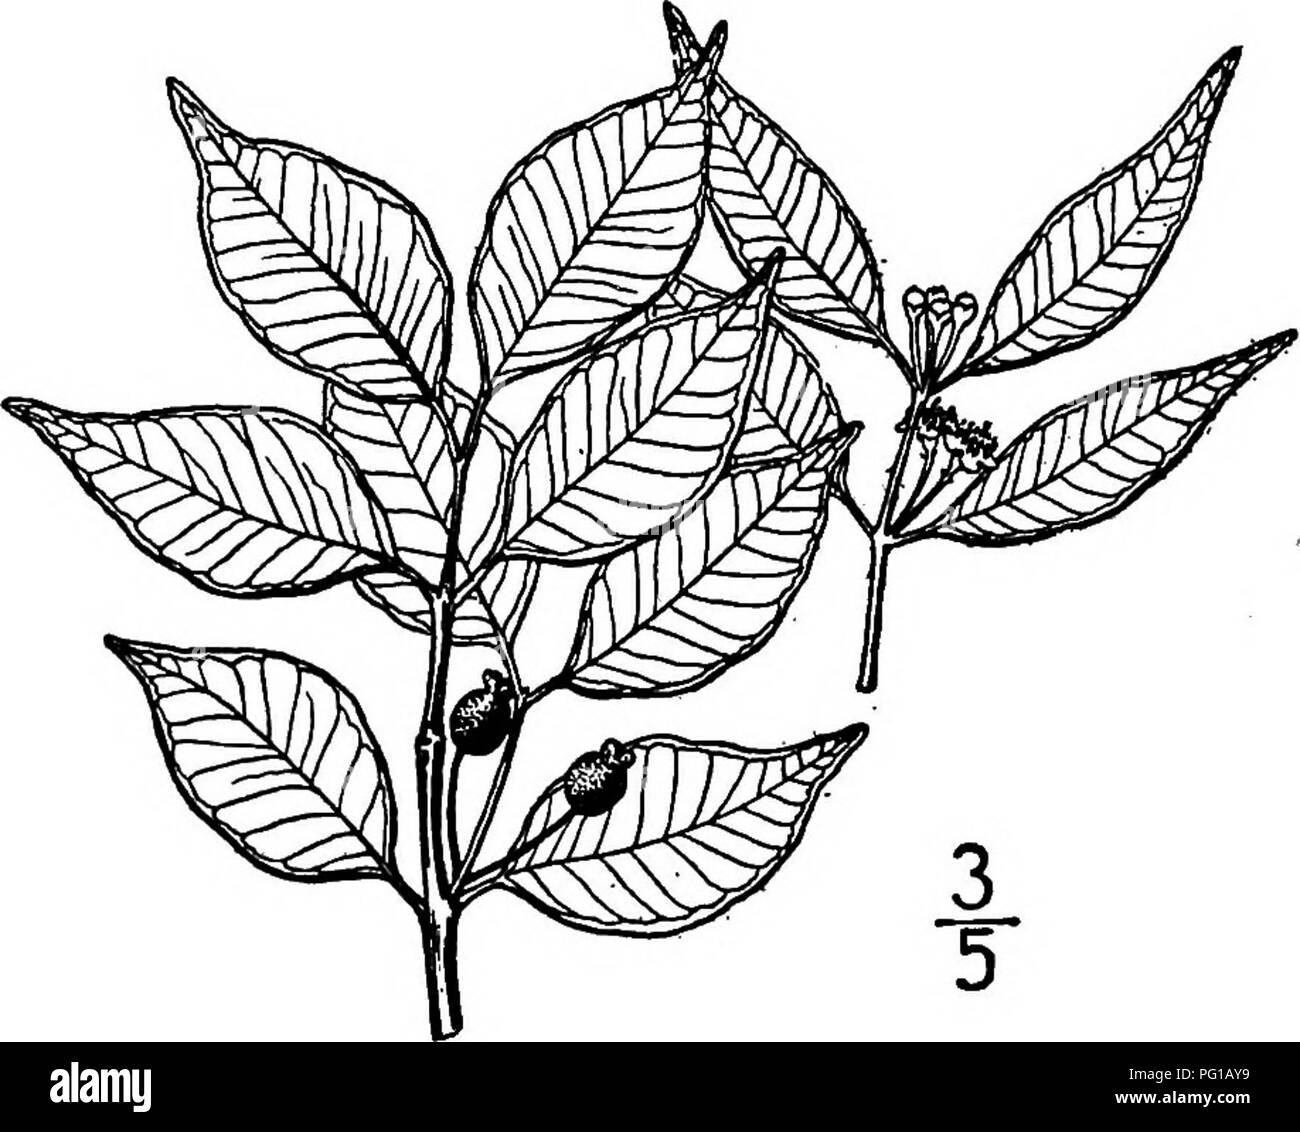 . North American trees : being descriptions and illustrations of the trees growing independently of cultivation in North America, north of Mexico and the West Indies . Trees. Long Stalked Stopper 727 black dotted beneath; the rather stout leaf-stalk is 2 to 6 mm. long. The flowers are 6 to 8 mm. wide and ap- pear at nearly all seasons, in several flowered, axillary clus- ters, on smooth pedicels 6 to 15 mm. long; the calyx is punctate, its 4 lobes ovate and sharp-pointed; corolla white, its blunt petals ovate. The fruit, which is solitary, or 2 to 4 together, is subglo- bose, scarlet, 5 to 8 m Stock Photo